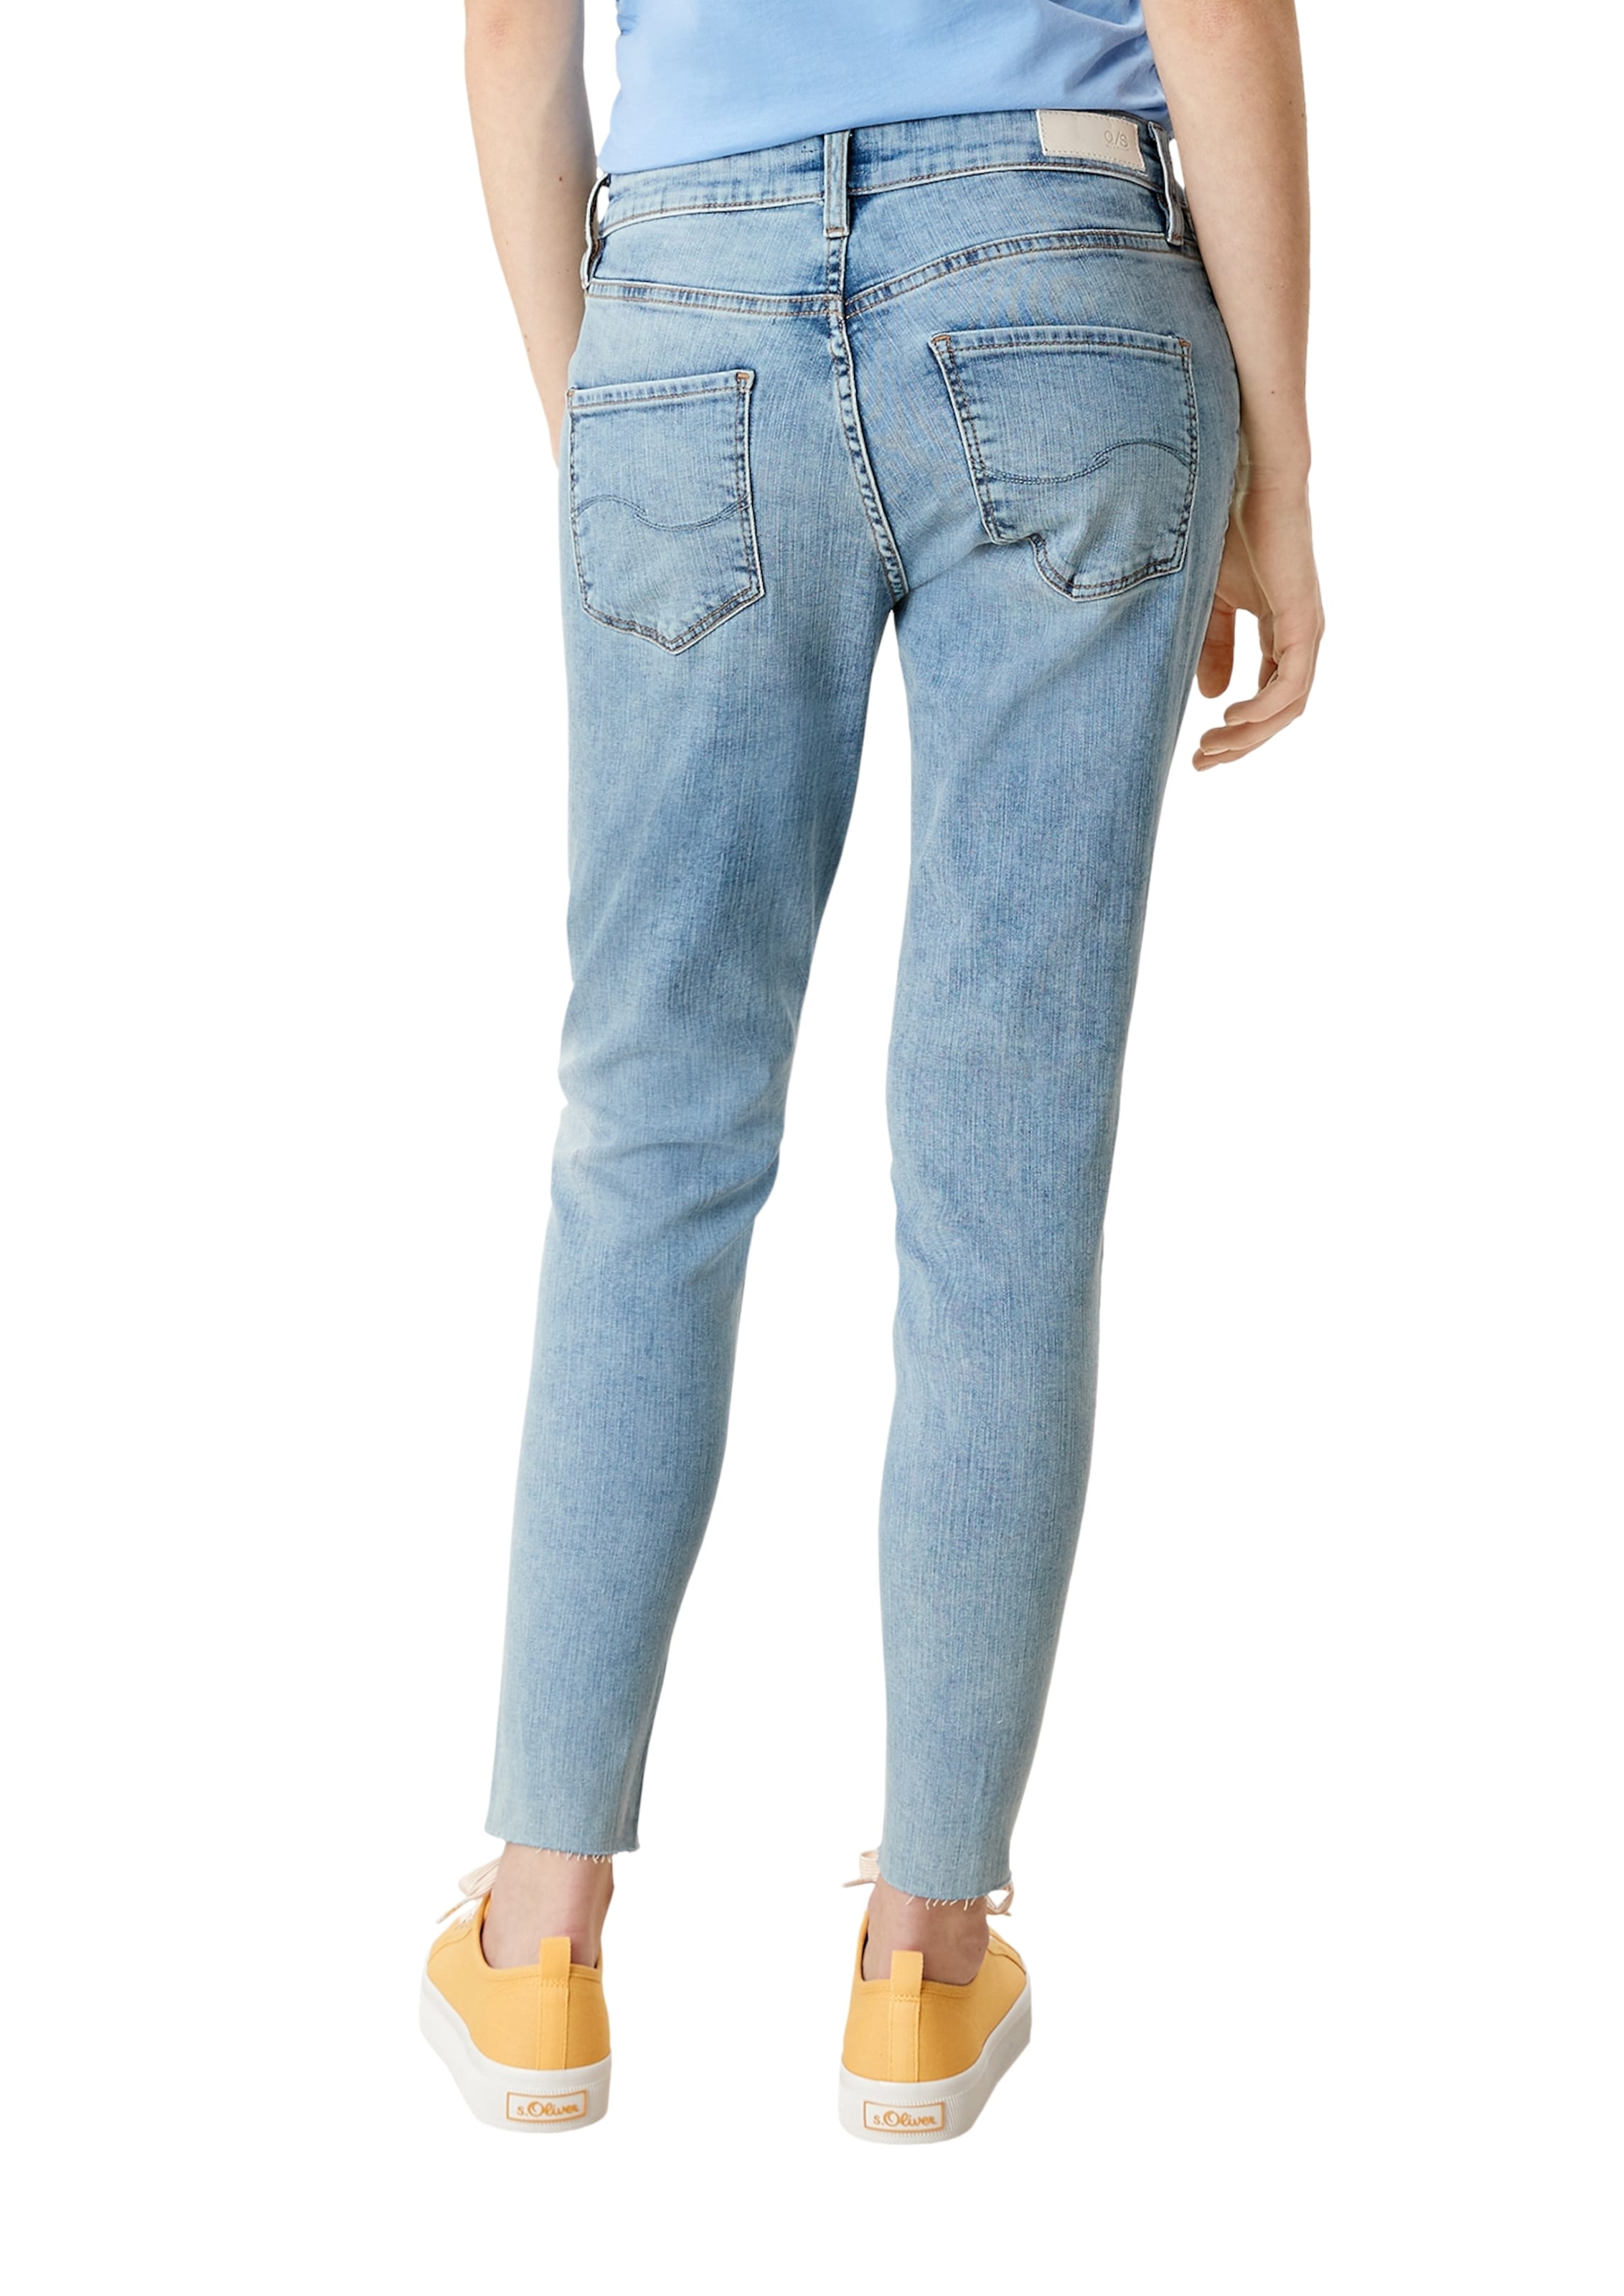 Frauen Jeans QS by s.Oliver Jeans in Blau - LZ23818